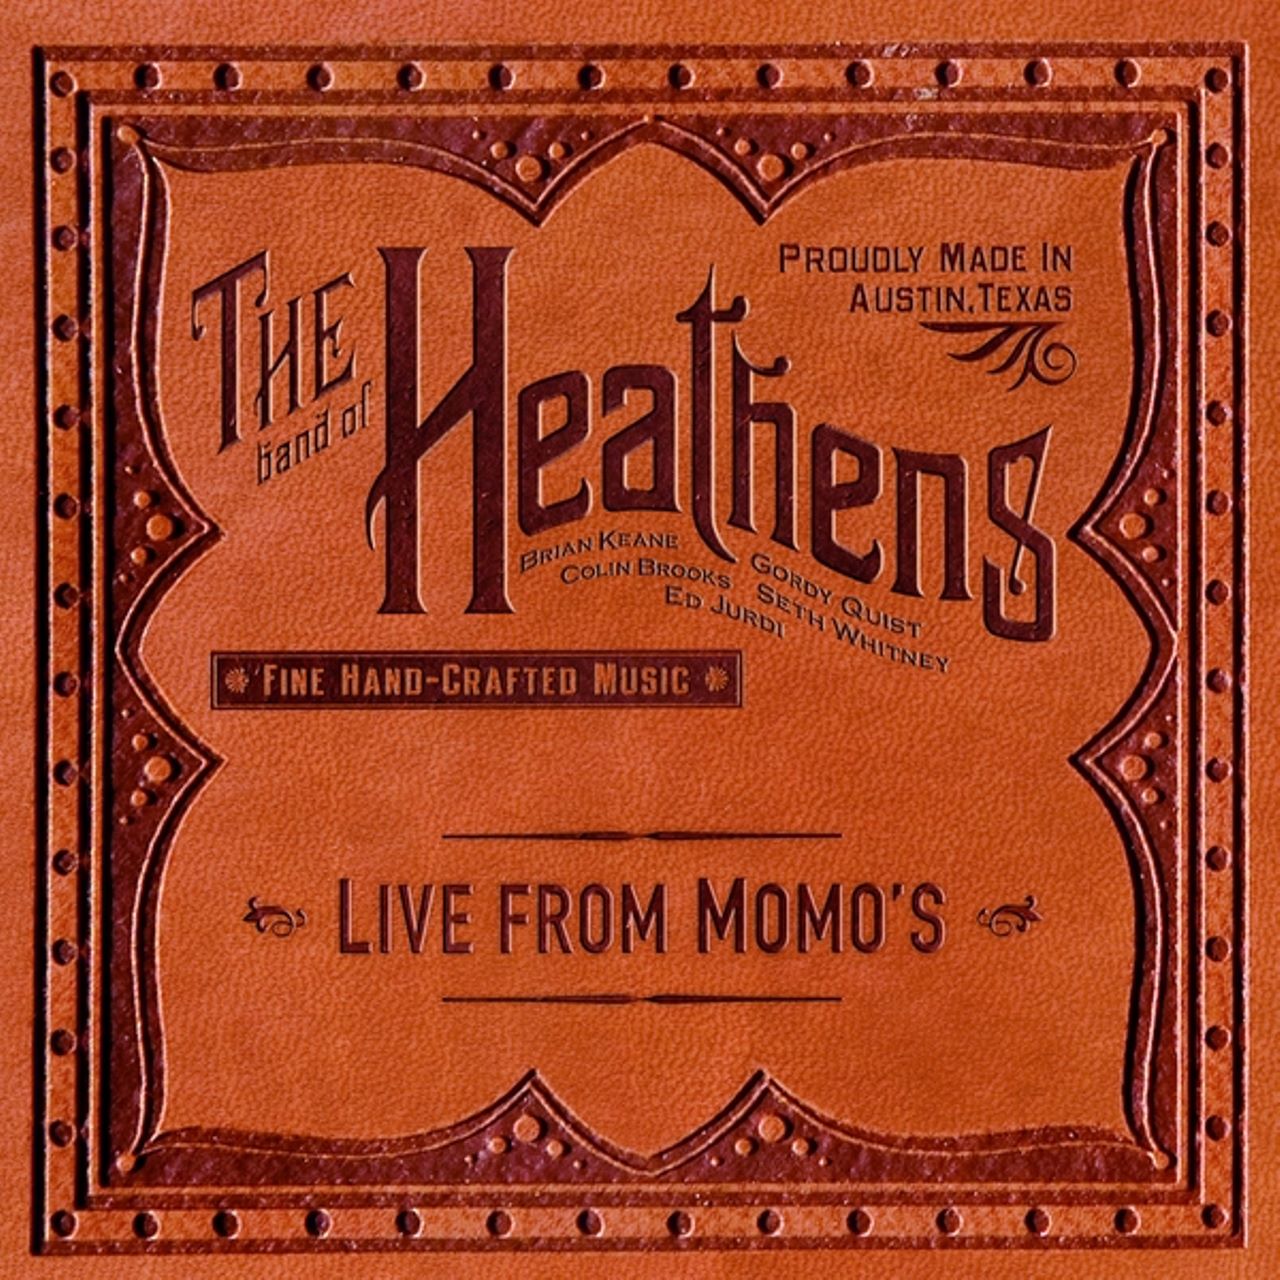 Band Of Heathens - Live From Momo’s cover album